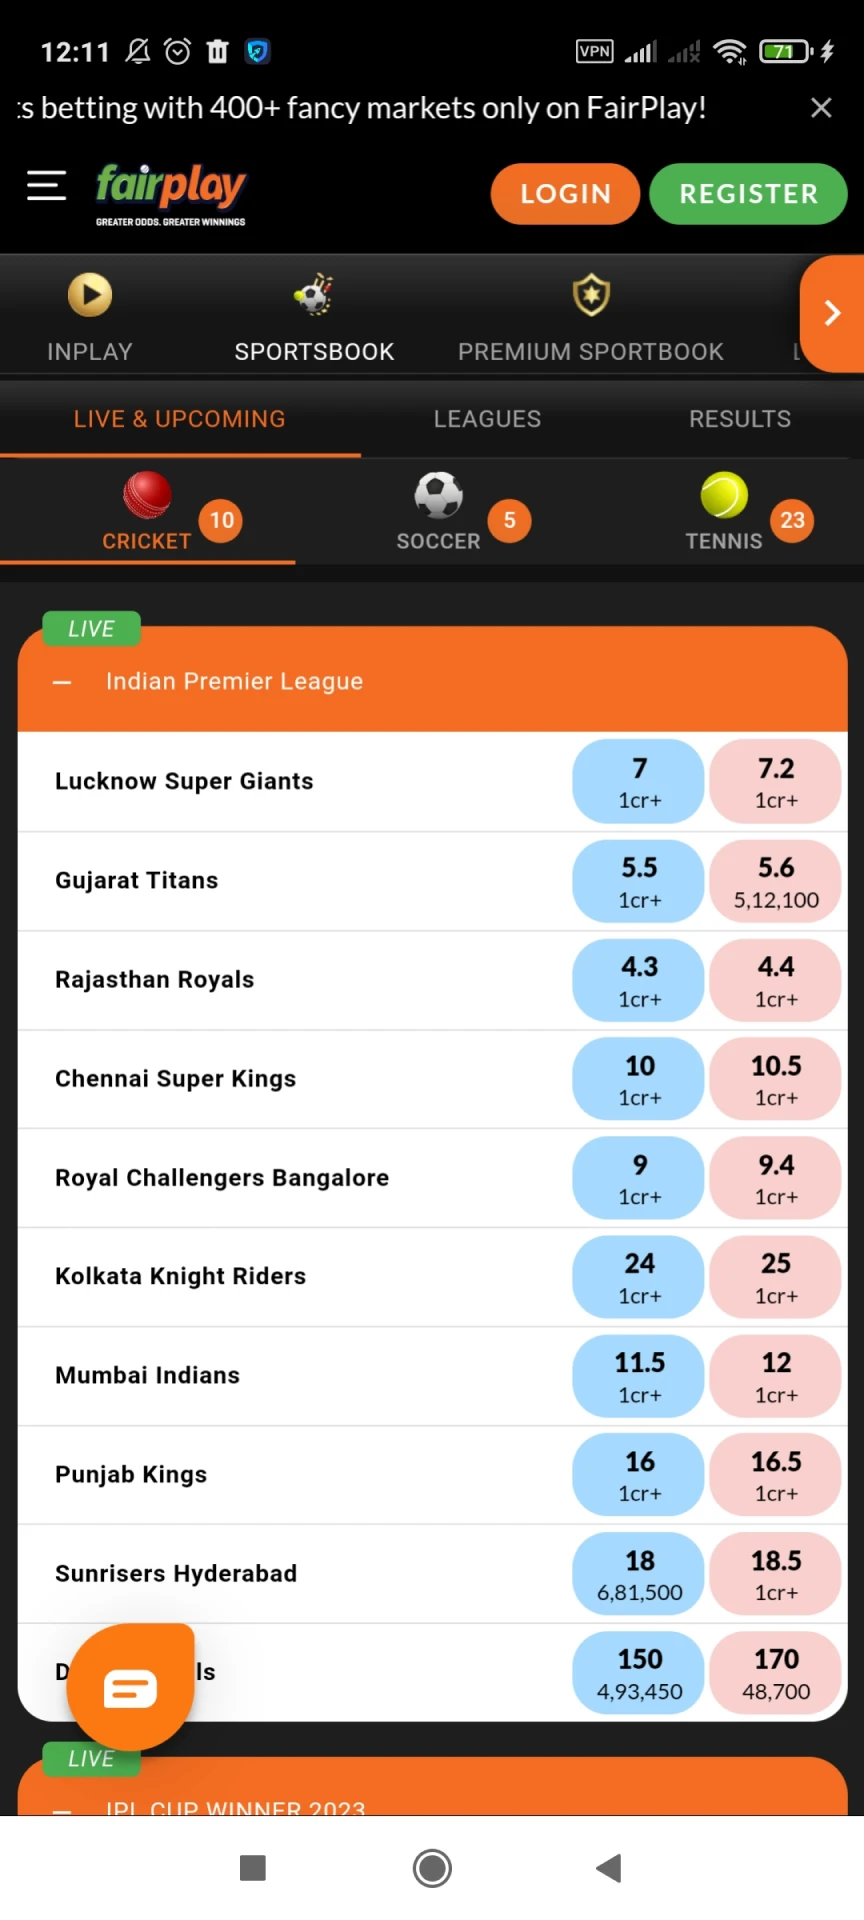 Cricket betting section in the Fairplay app.